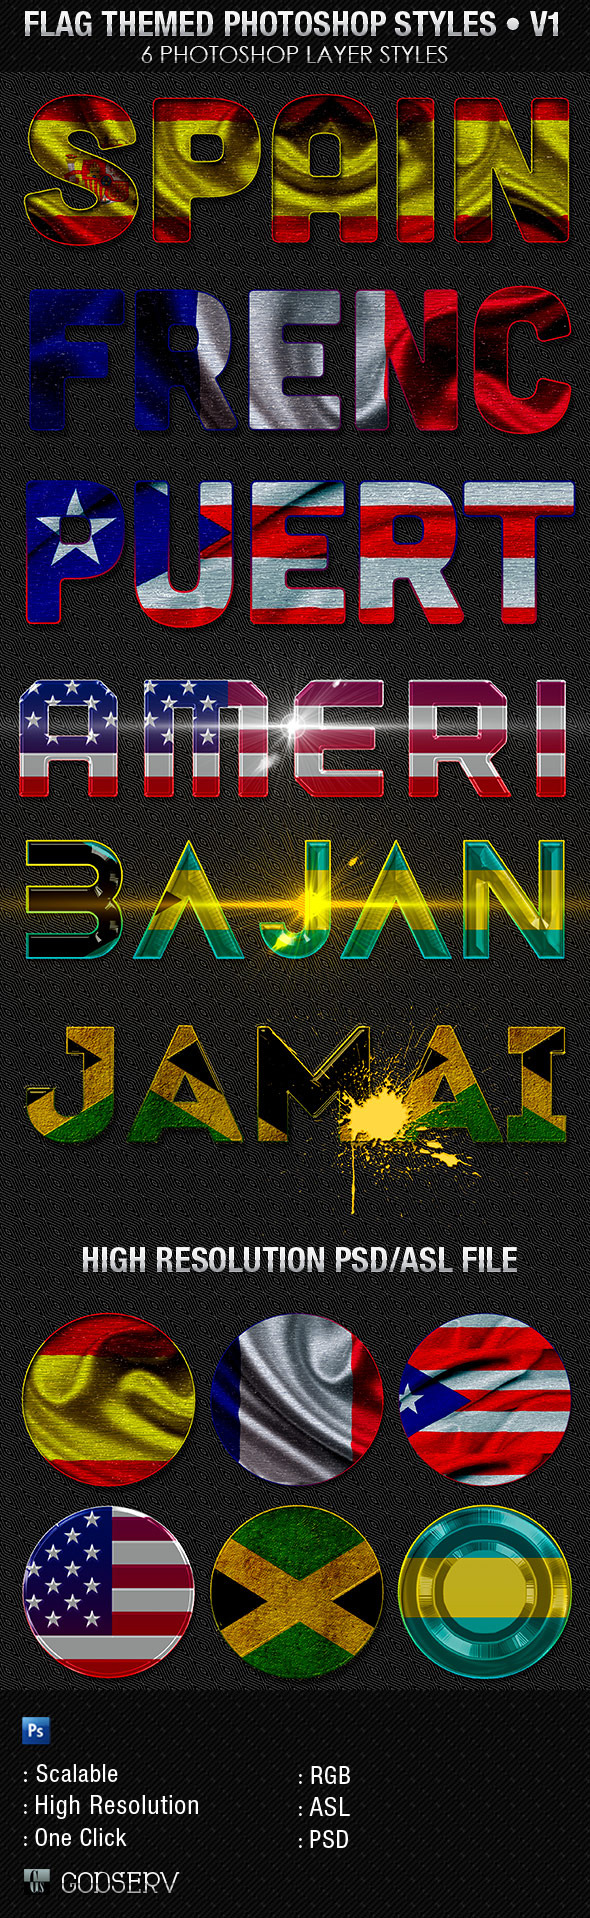 Flag Themed Photoshop Text Layer Styles - V1